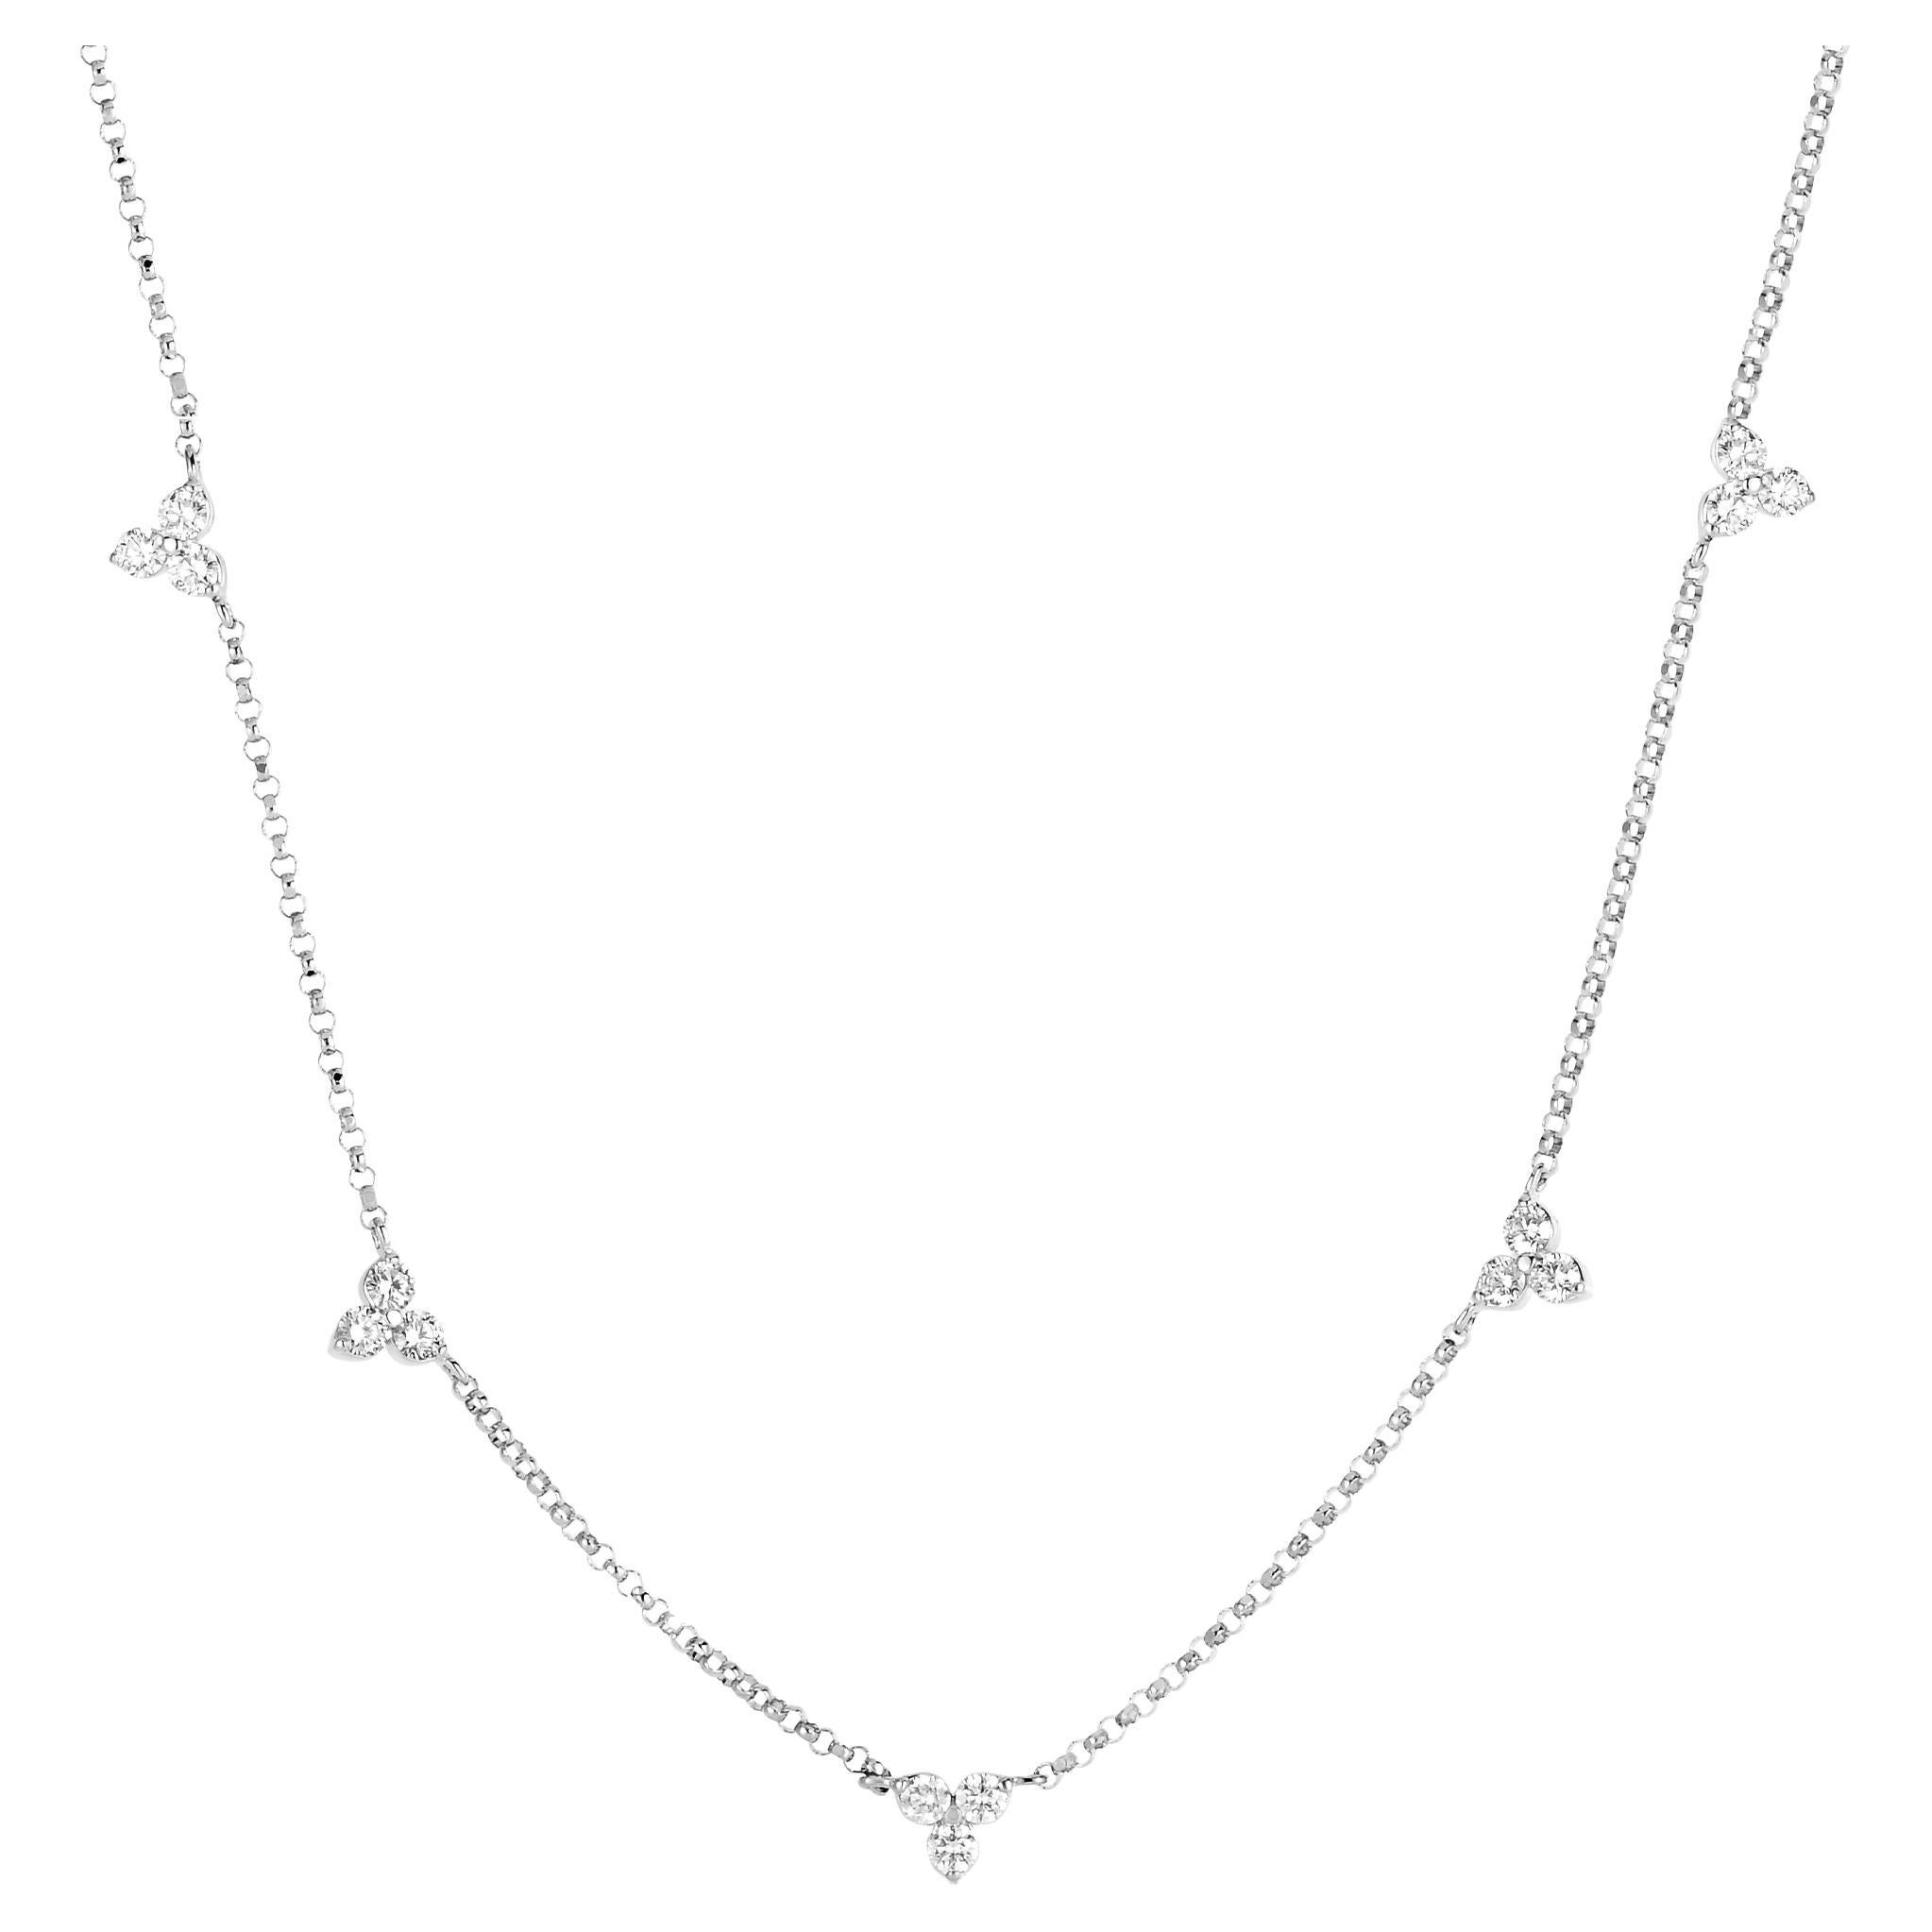 Roberto Coin 5 Station Diamond Flower Necklace 7773261AW17X